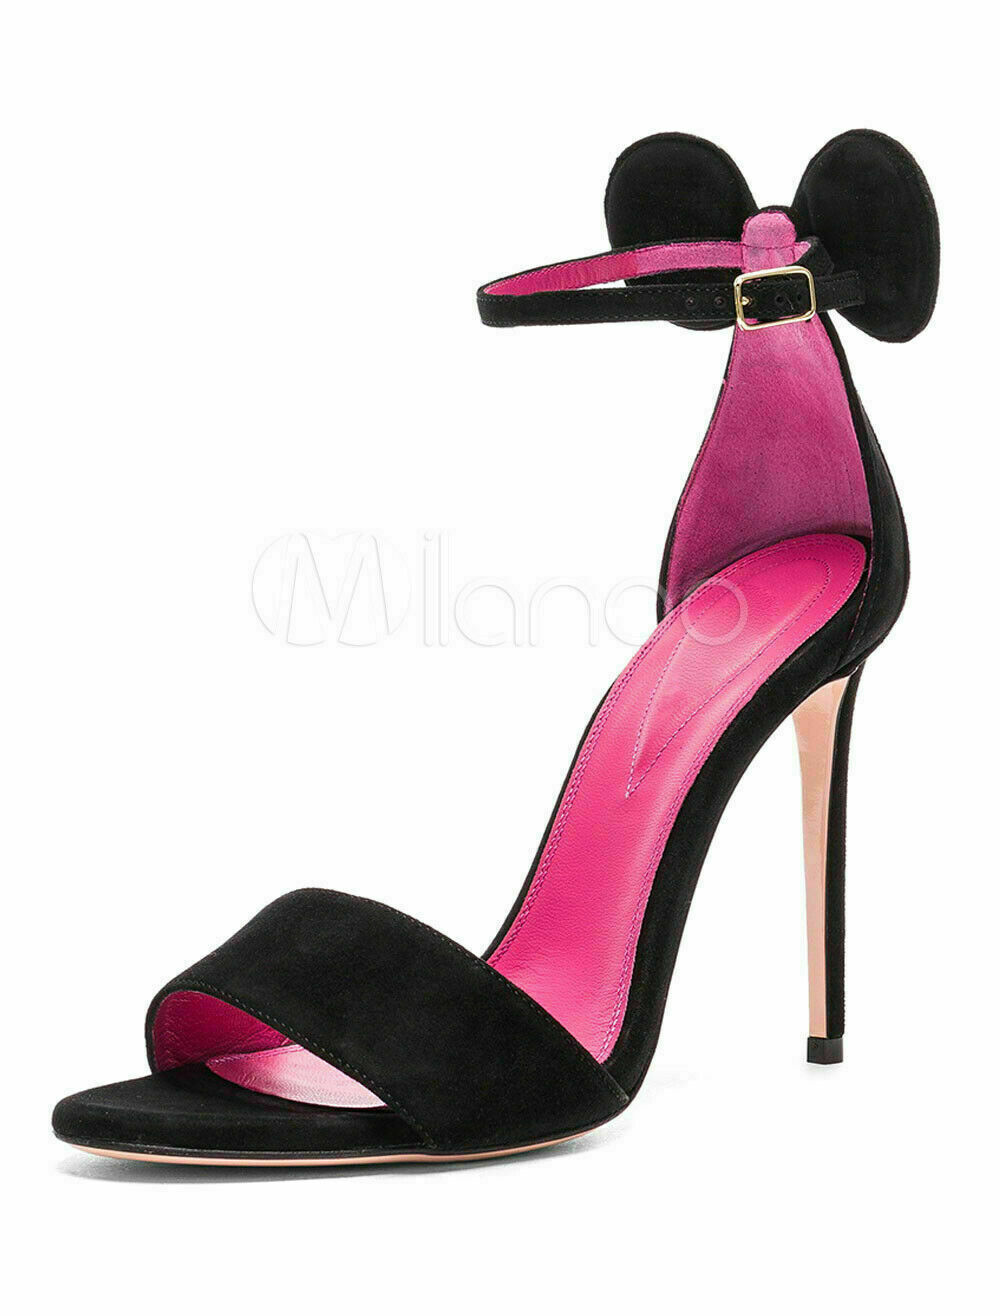 Black High Heel Stiletto Ankle Strap Sandal Shoes For Women NEW Size 7